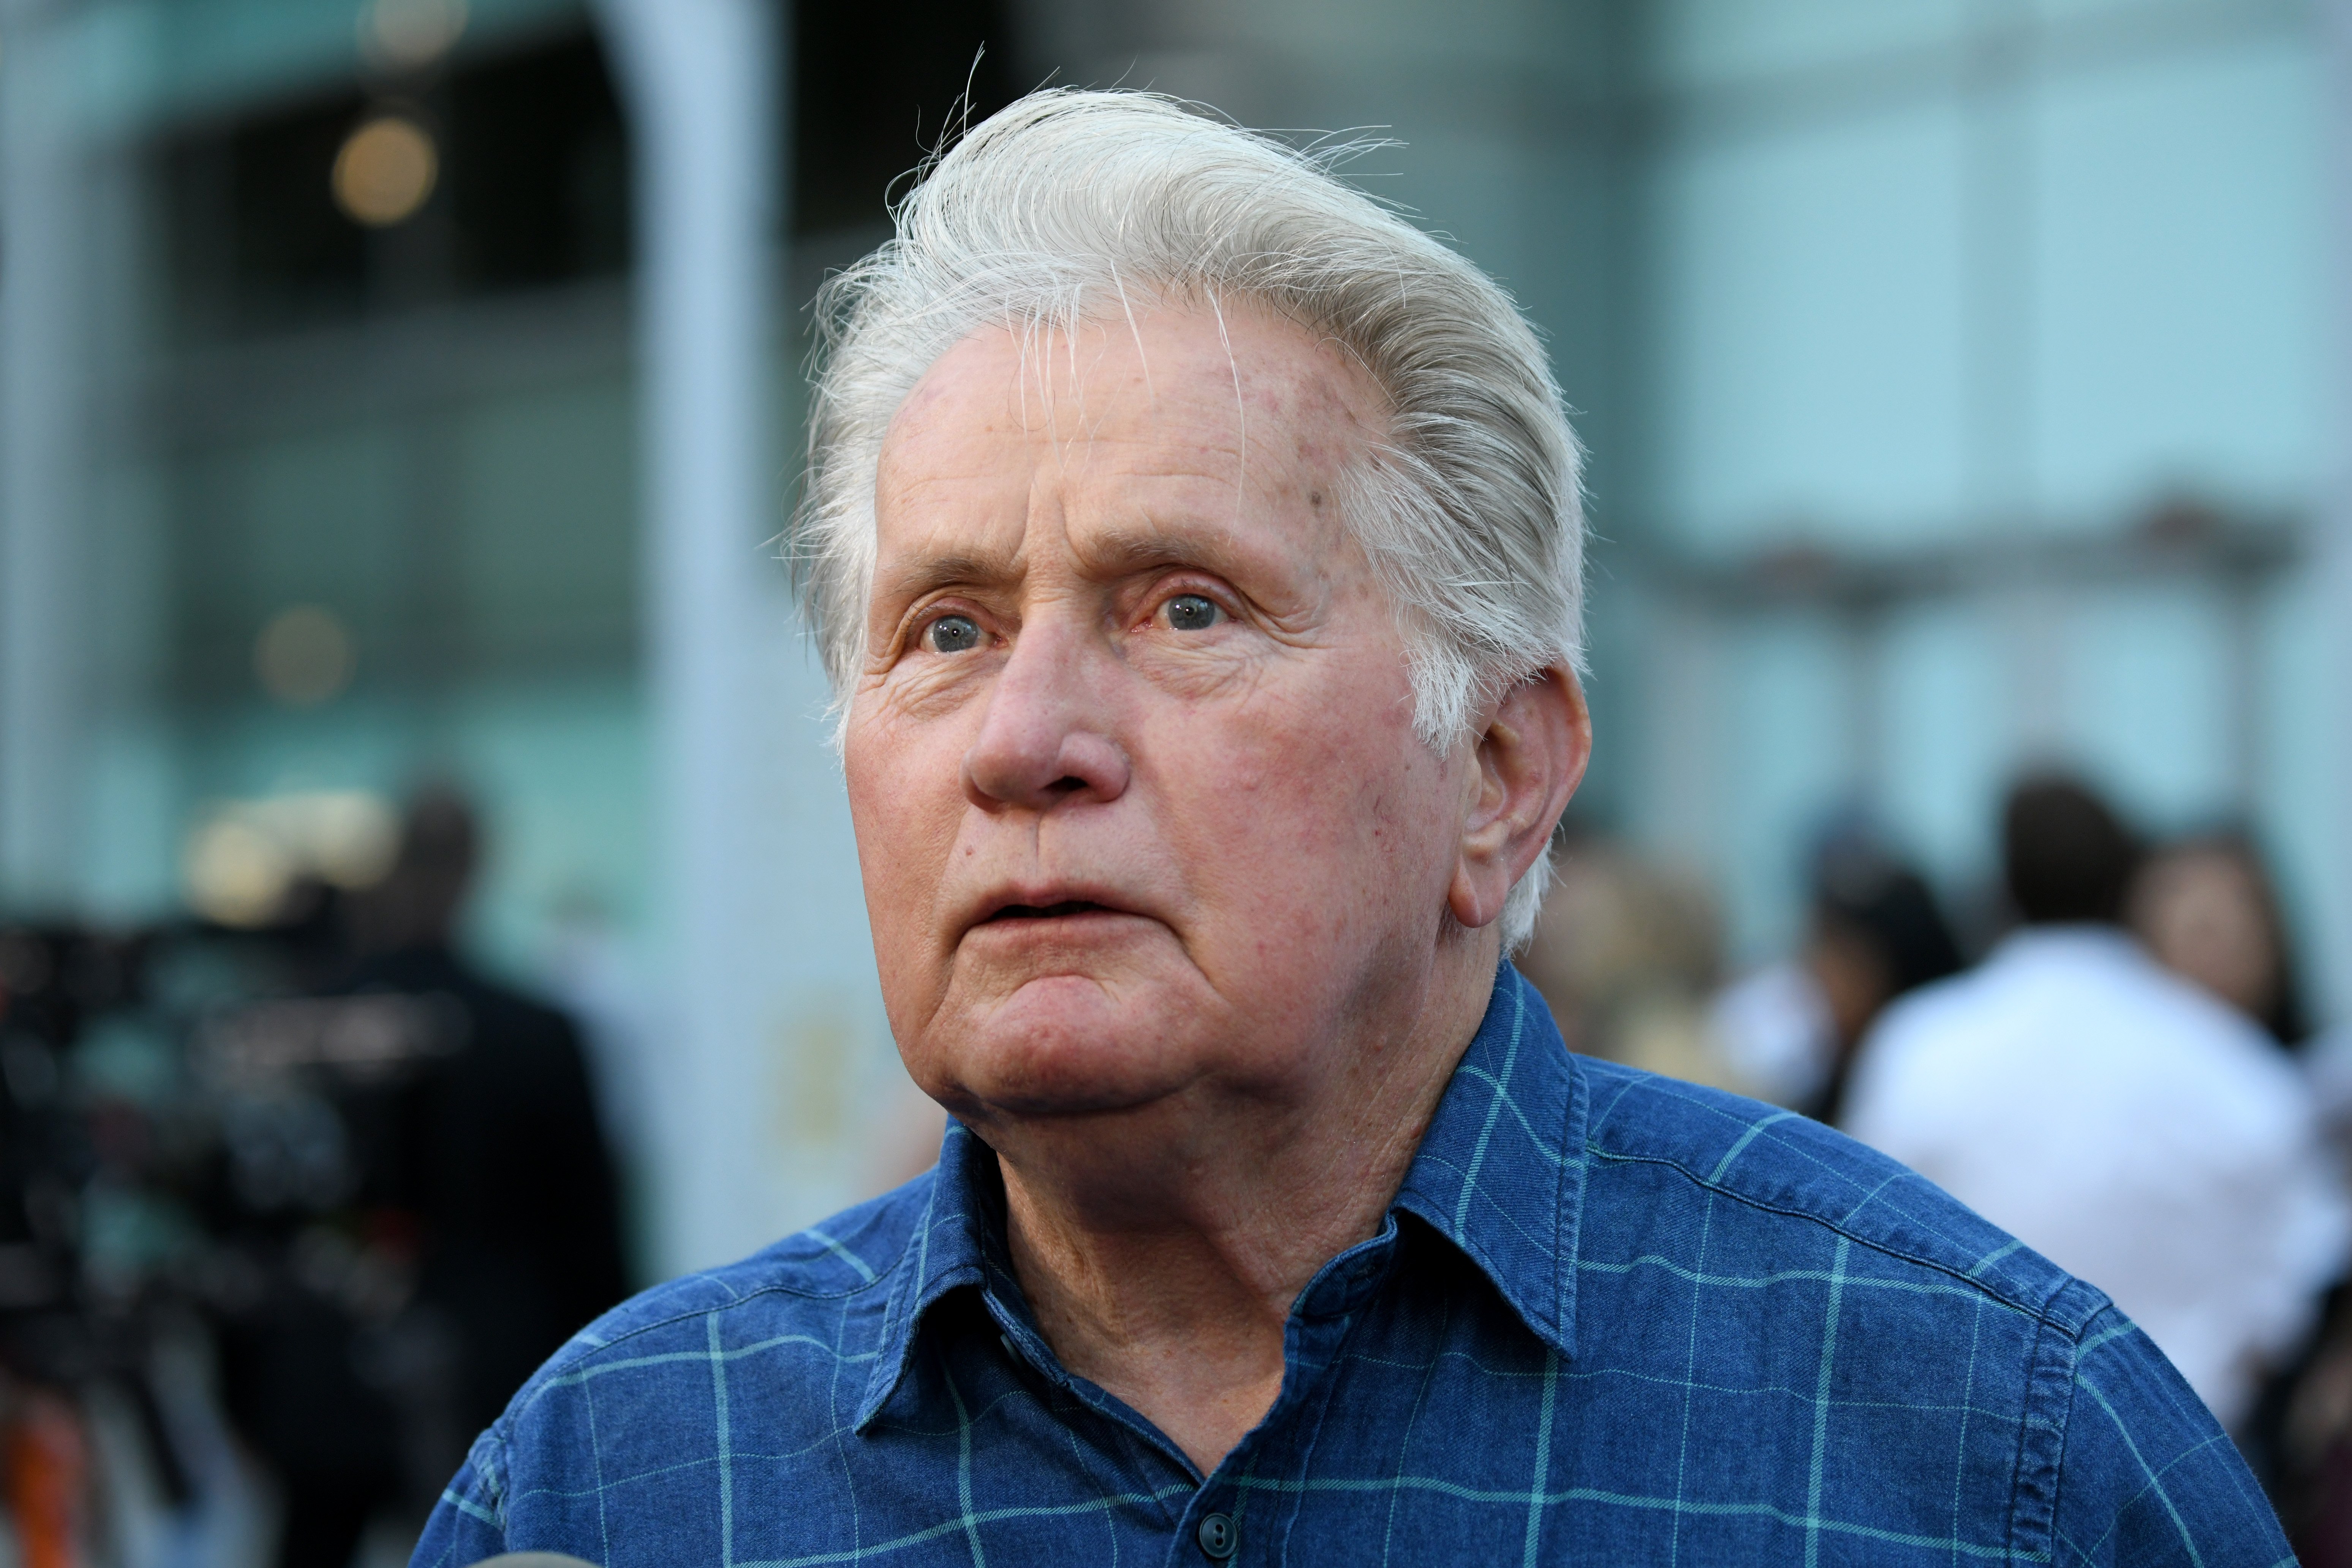 Martin Sheen besucht die "Apocalypse Now" Final Cut 40th Anniversary Special Screening at ArcLight Cinemas Cinerama Dome on August 12, 2019 in Hollywood, California. | Quelle: Getty Images